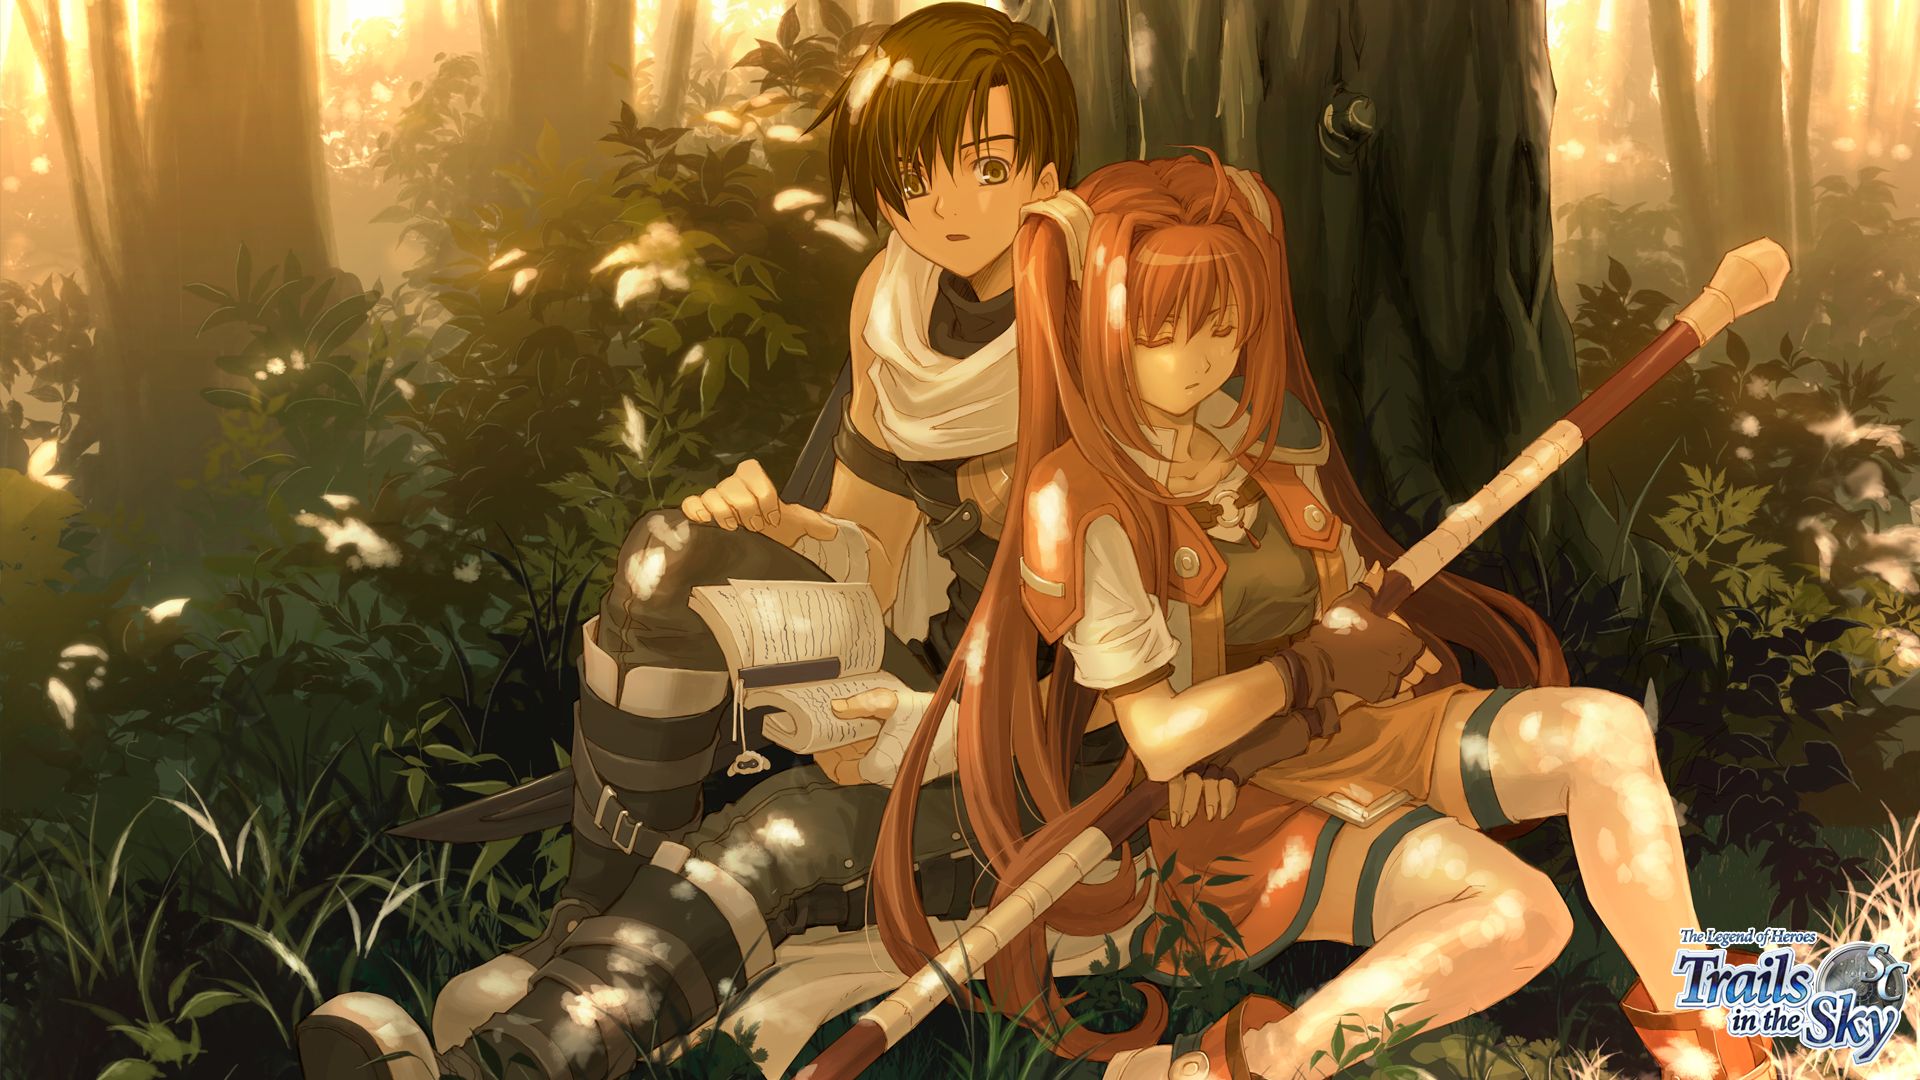 The Legend of Heroes: Trails from Zero instal the new version for iphone